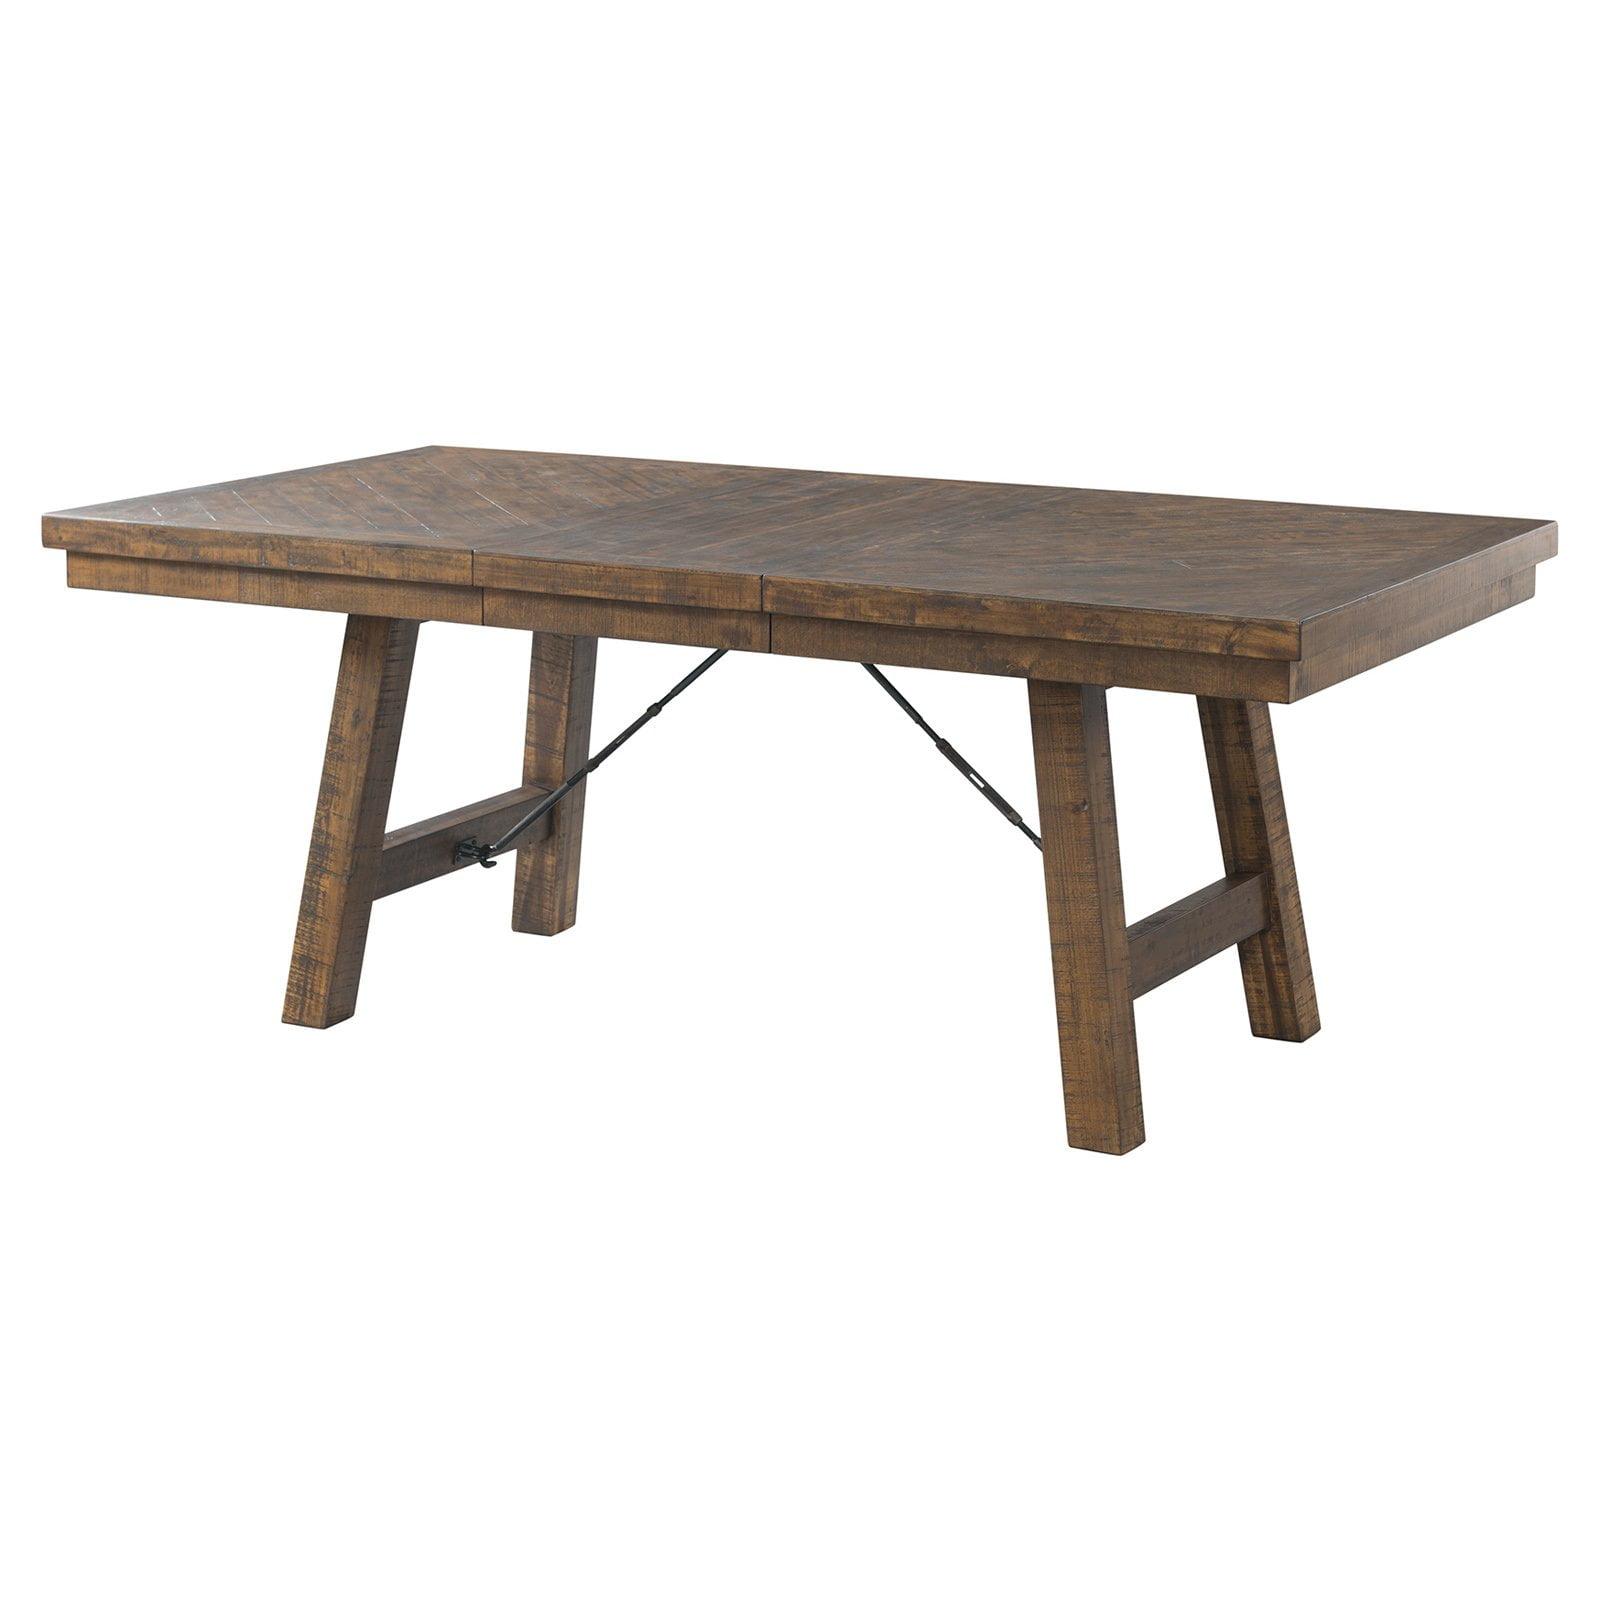 Rustic Flair Extendable Dining Table in Smokey Walnut with Turnbuckle Accents